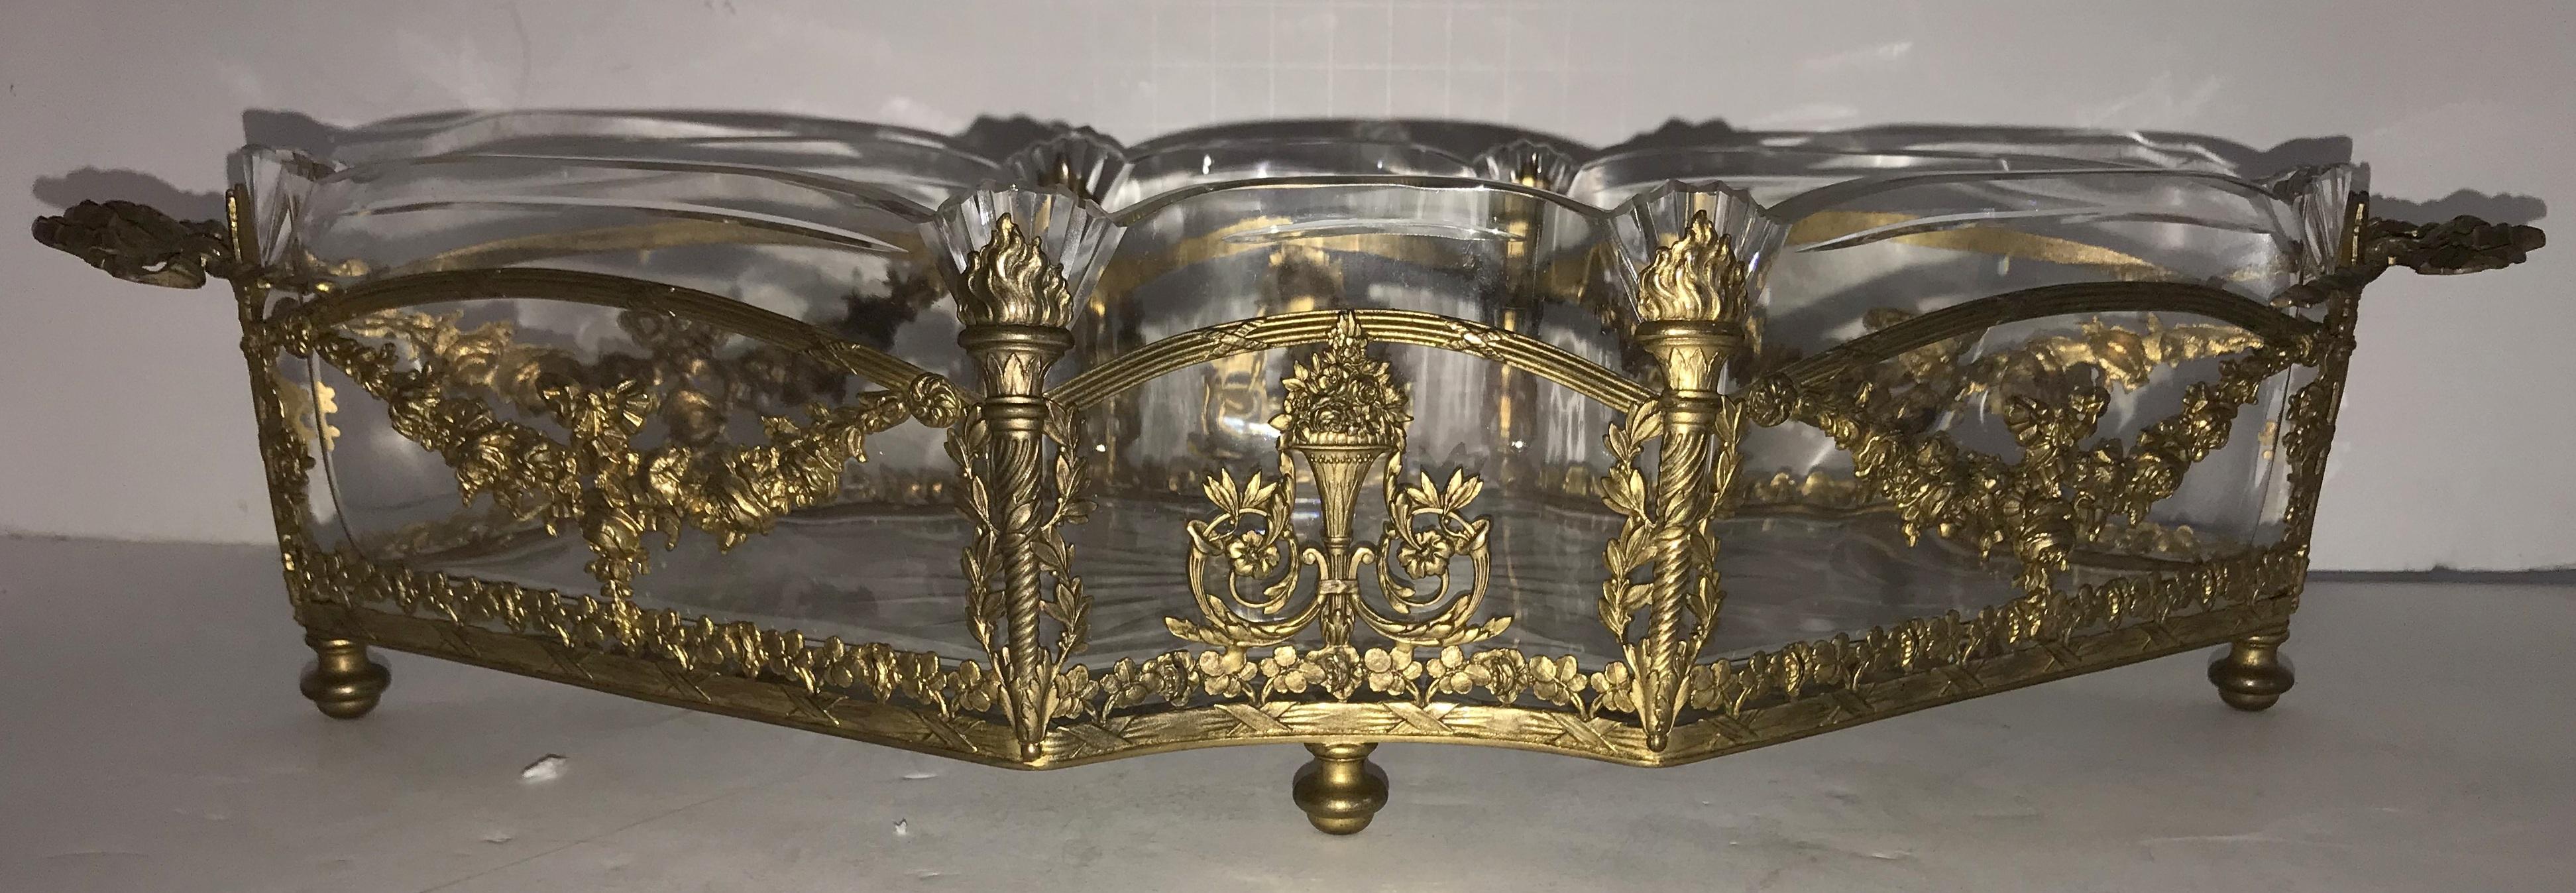 Wonderful French Doré Bronze Baccarat Etched Crystal Centrepiece Swag Torches In Good Condition For Sale In Roslyn, NY